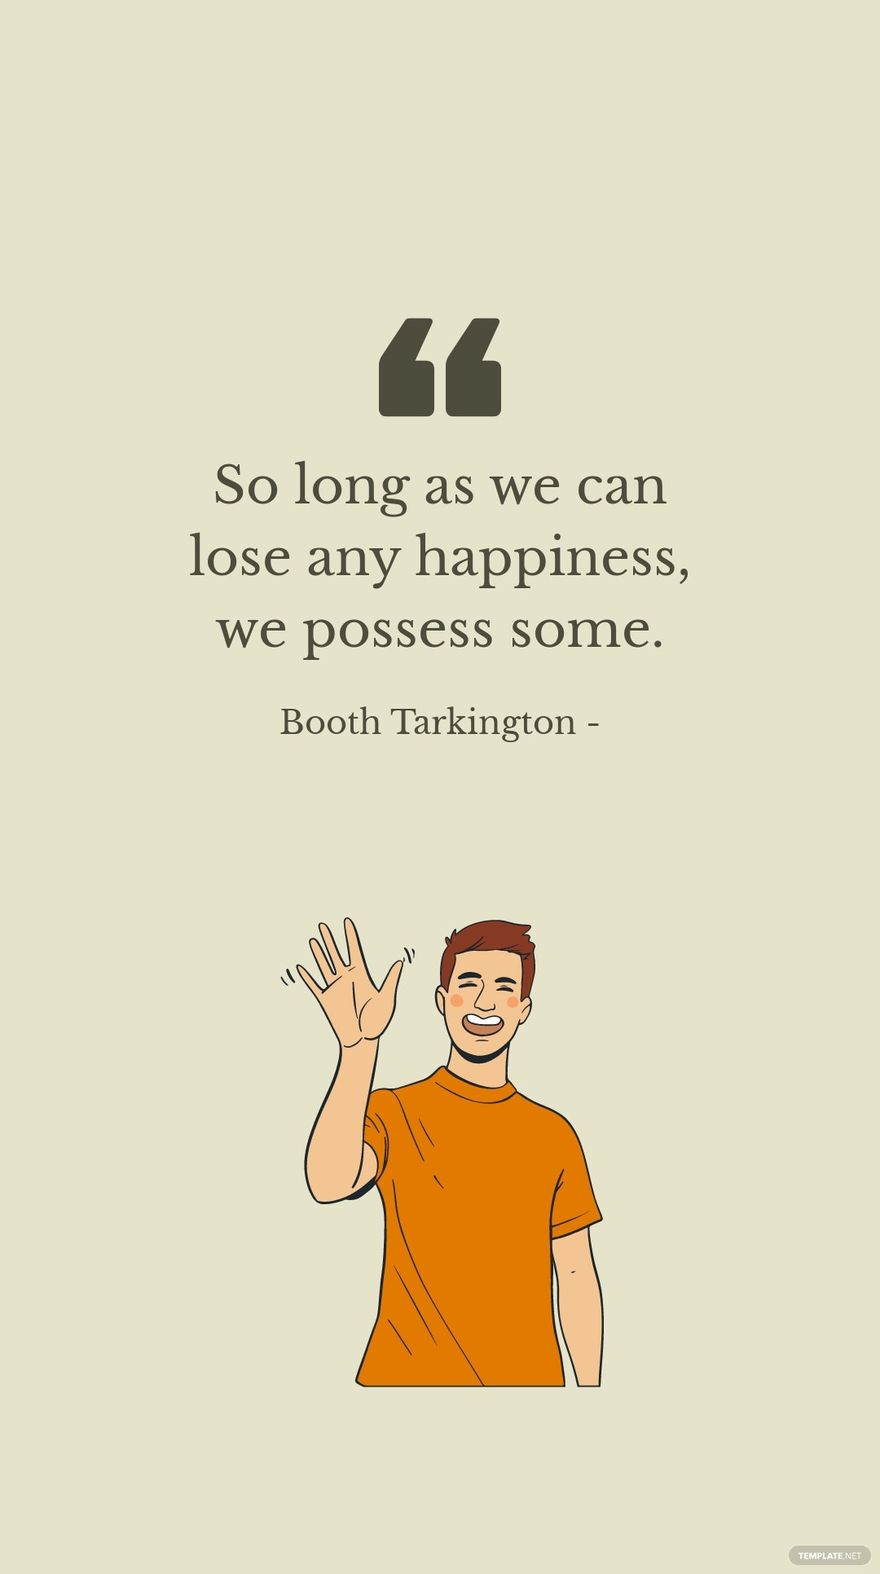 Booth Tarkington - So long as we can lose any happiness, we possess some.